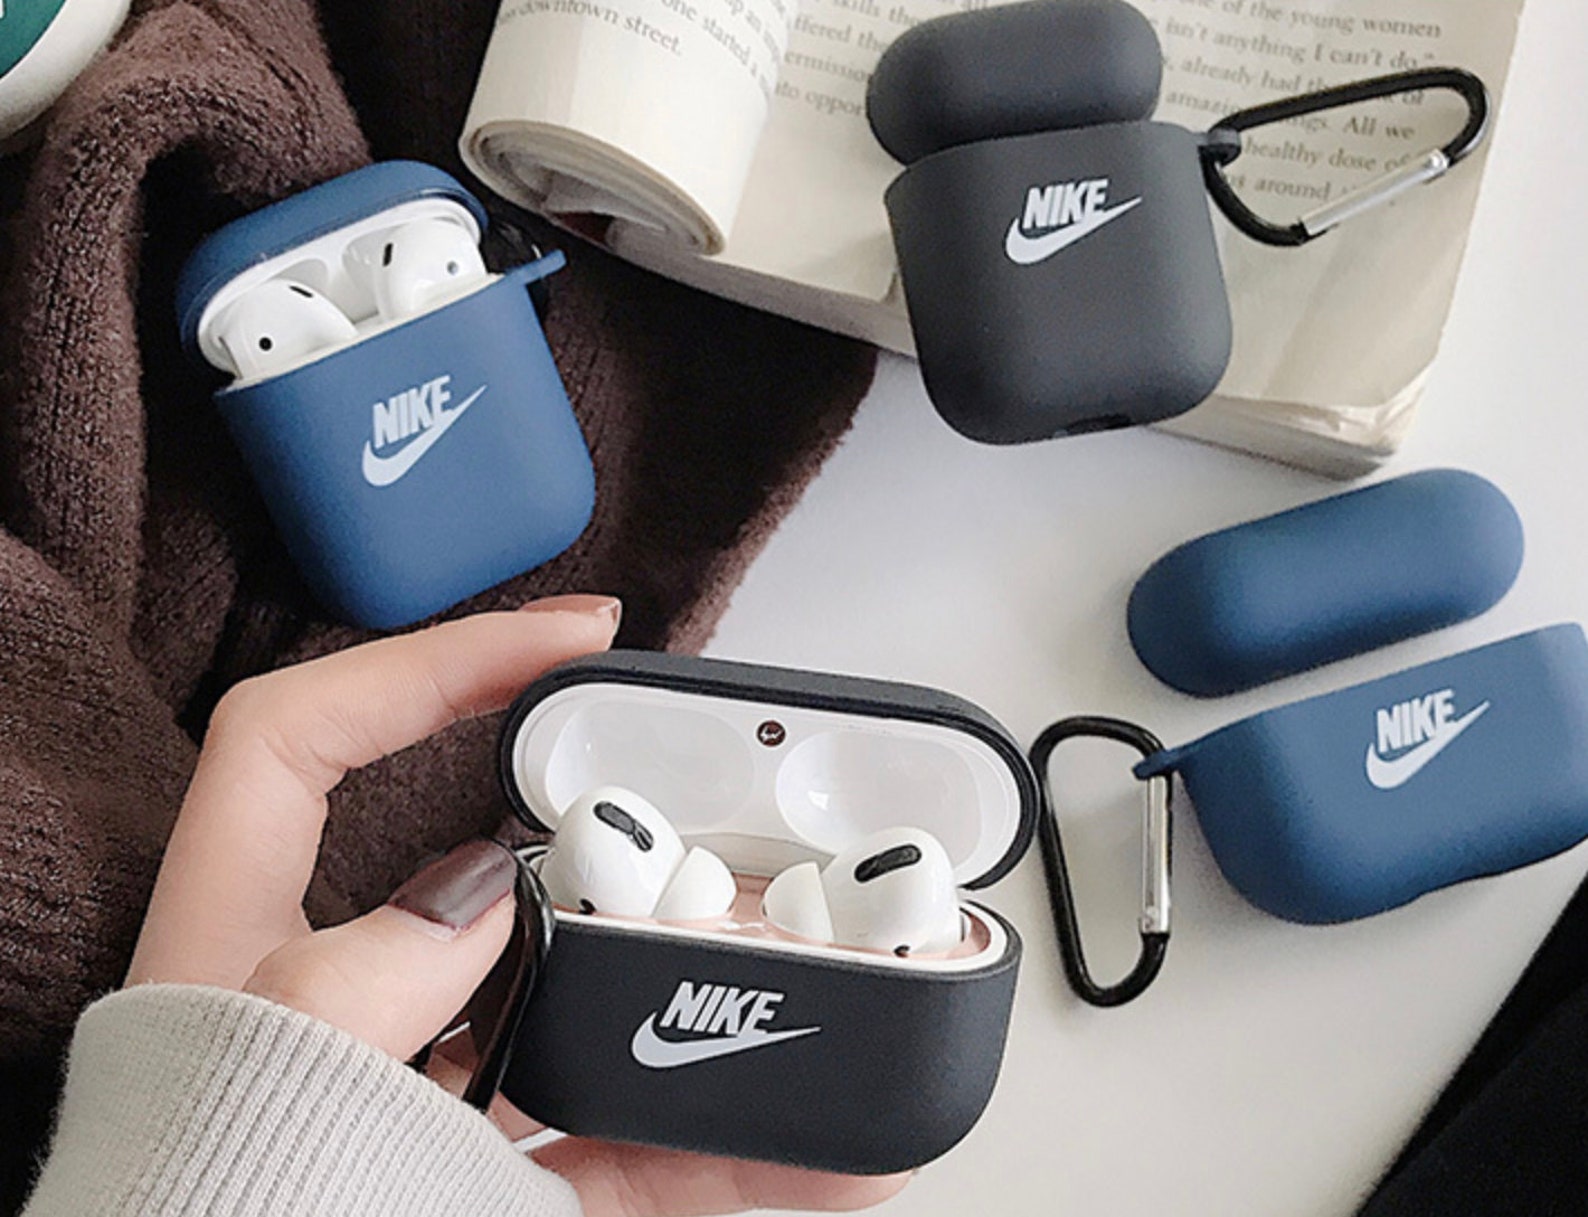 Nike airpod case for airpod 1 and 2cute airpod case for airpod | Etsy